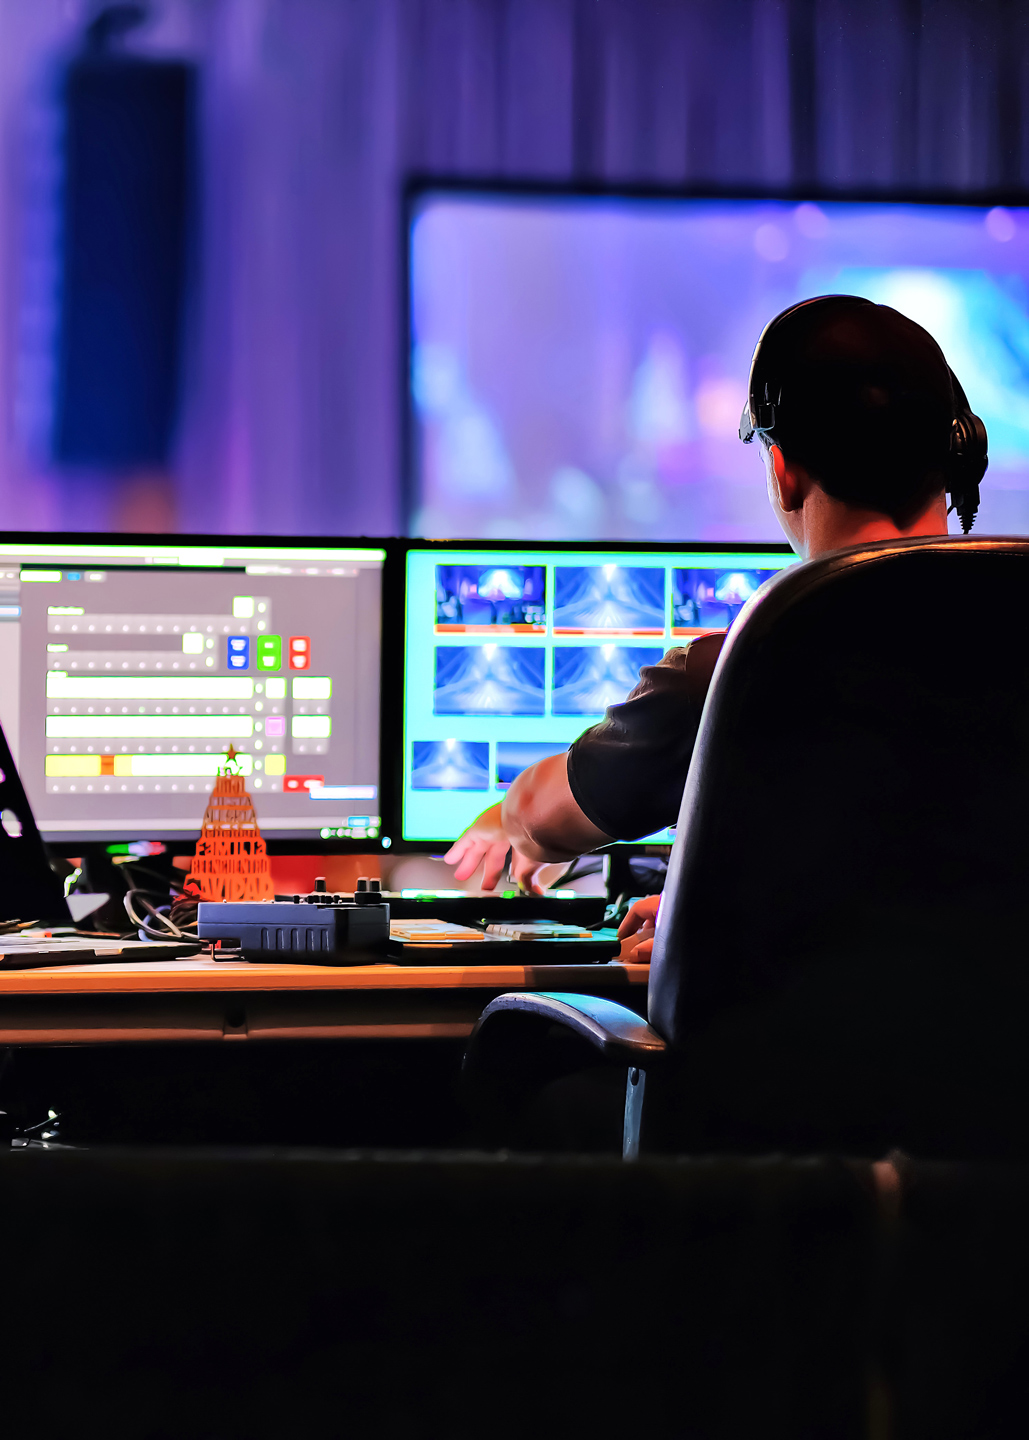 A video operator sitting in front of multiple screens in a control room, wearing headphones and interacting with an audiovisual mixing console.